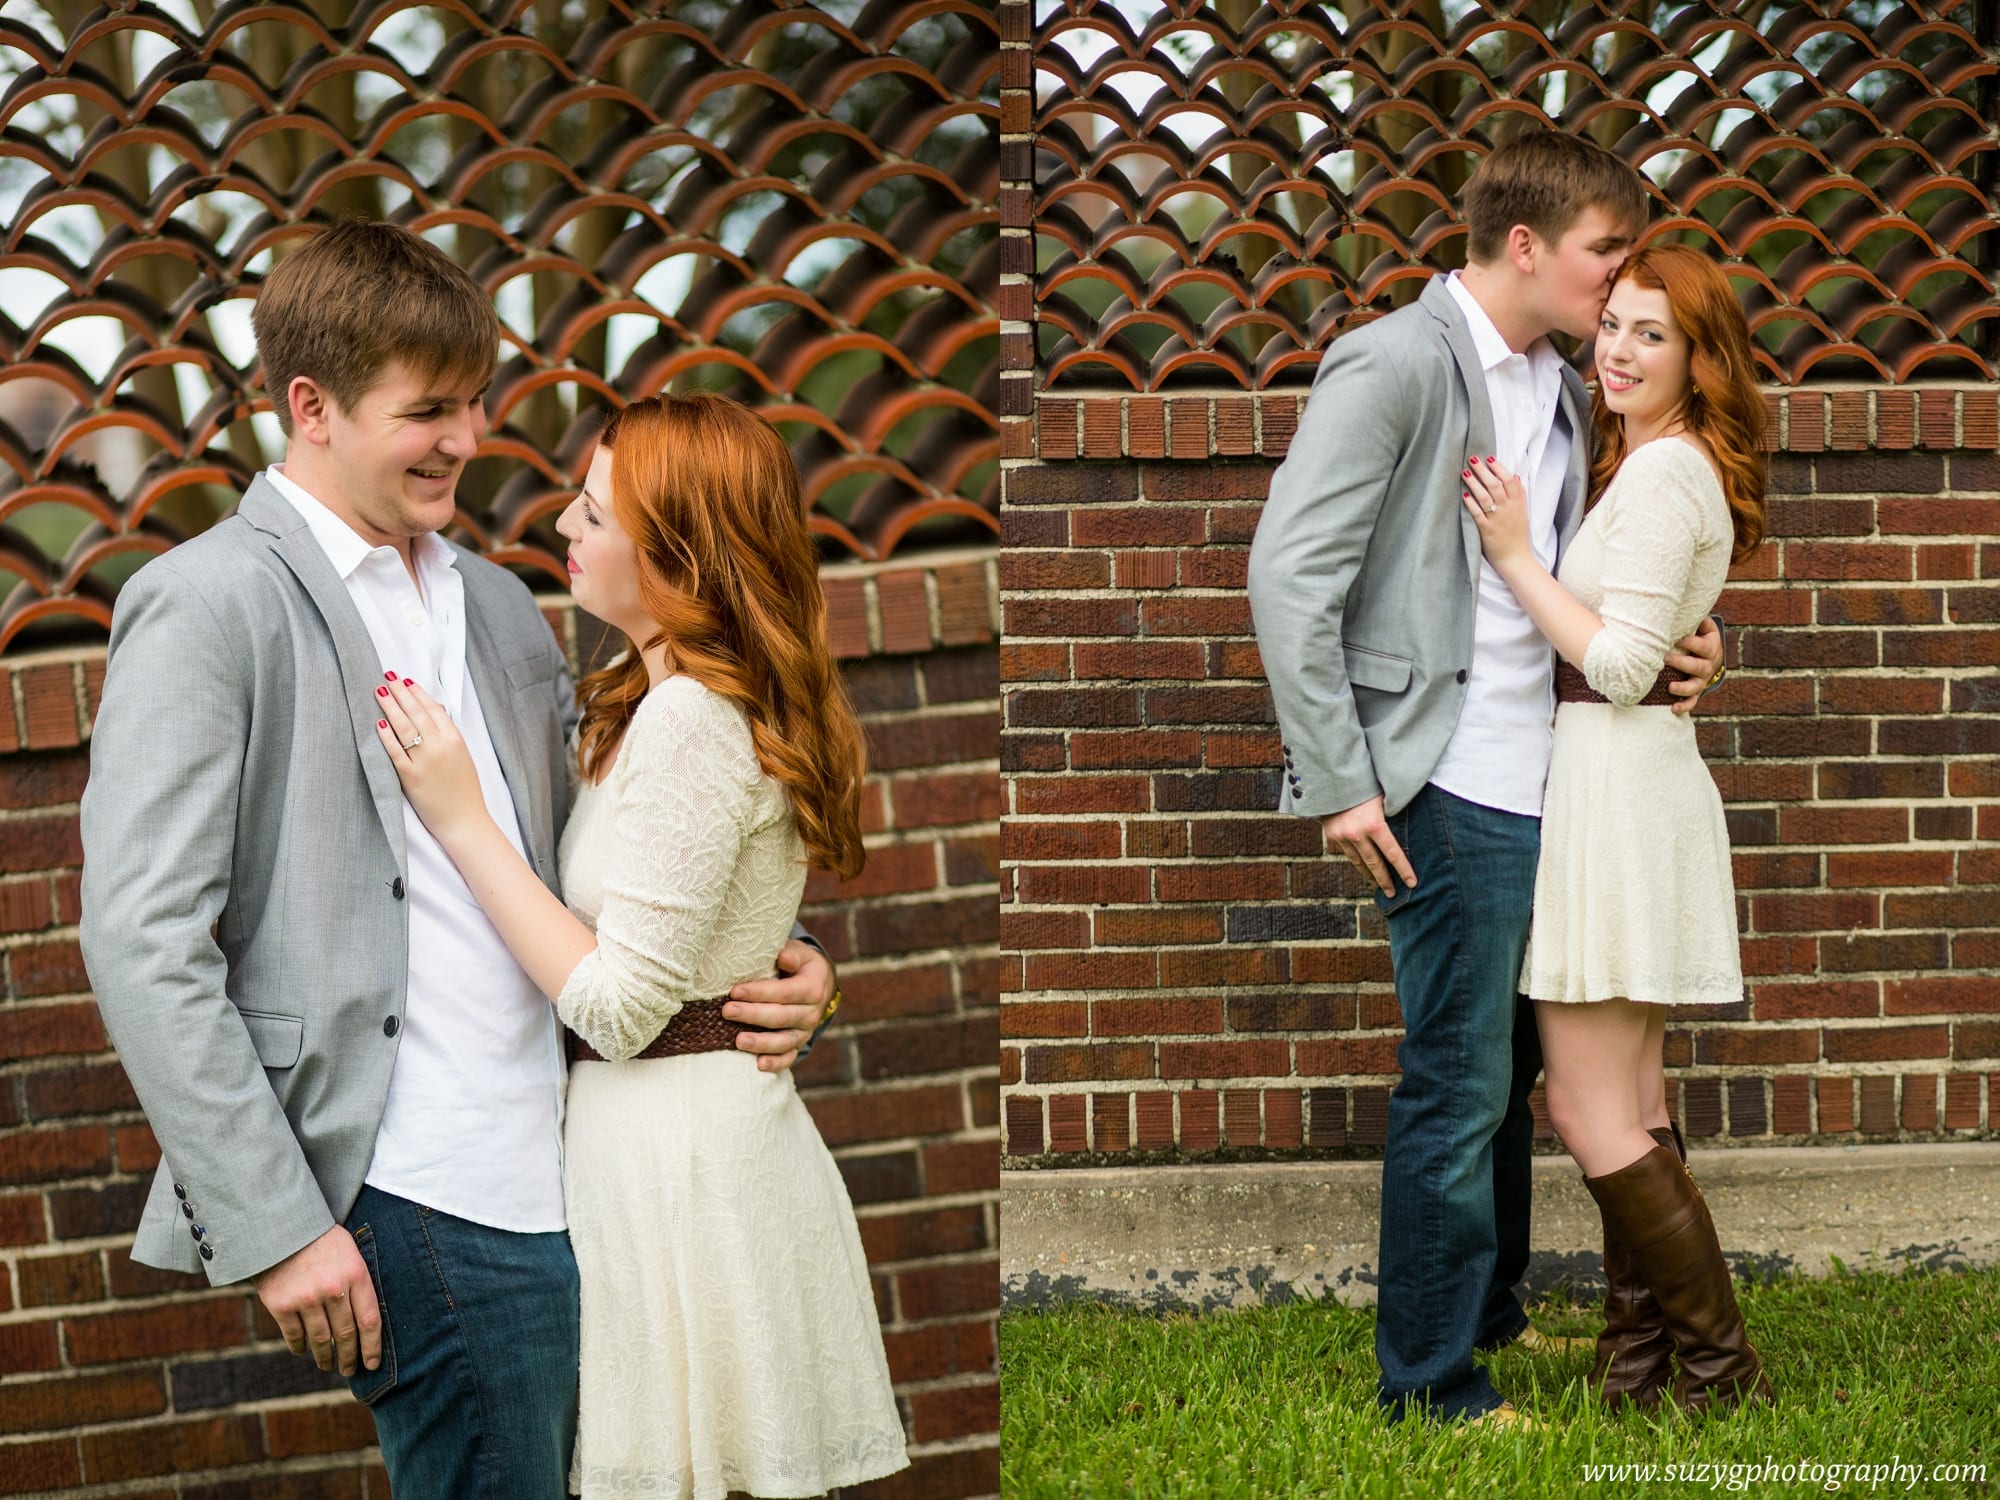 engagements-new orleans-texas-baton rouge-lake charles-suzy g-photography-suzygphotography_0120